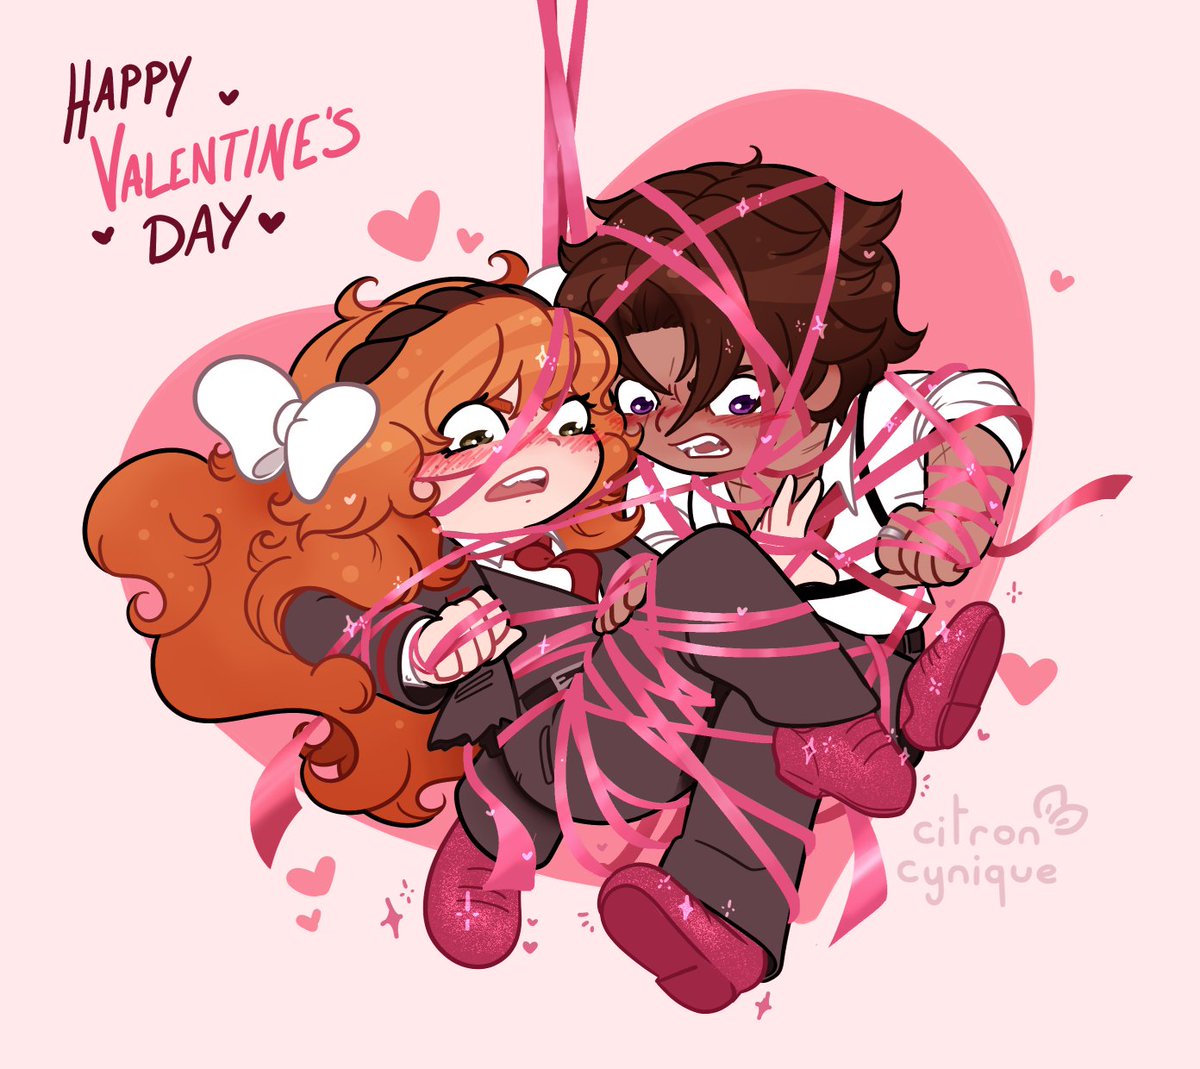 ✨💖 HAPPY VALENTINE'S DAY💖✨

I love my horrible little star-crossed loathers ✨ I had to tie them up in those ribbons, they were calling for them!

#LimbusCompany #每日一78 #LCB78 #Heathmael 
🎀✨💜🧡🌩️⛪️✨🎀